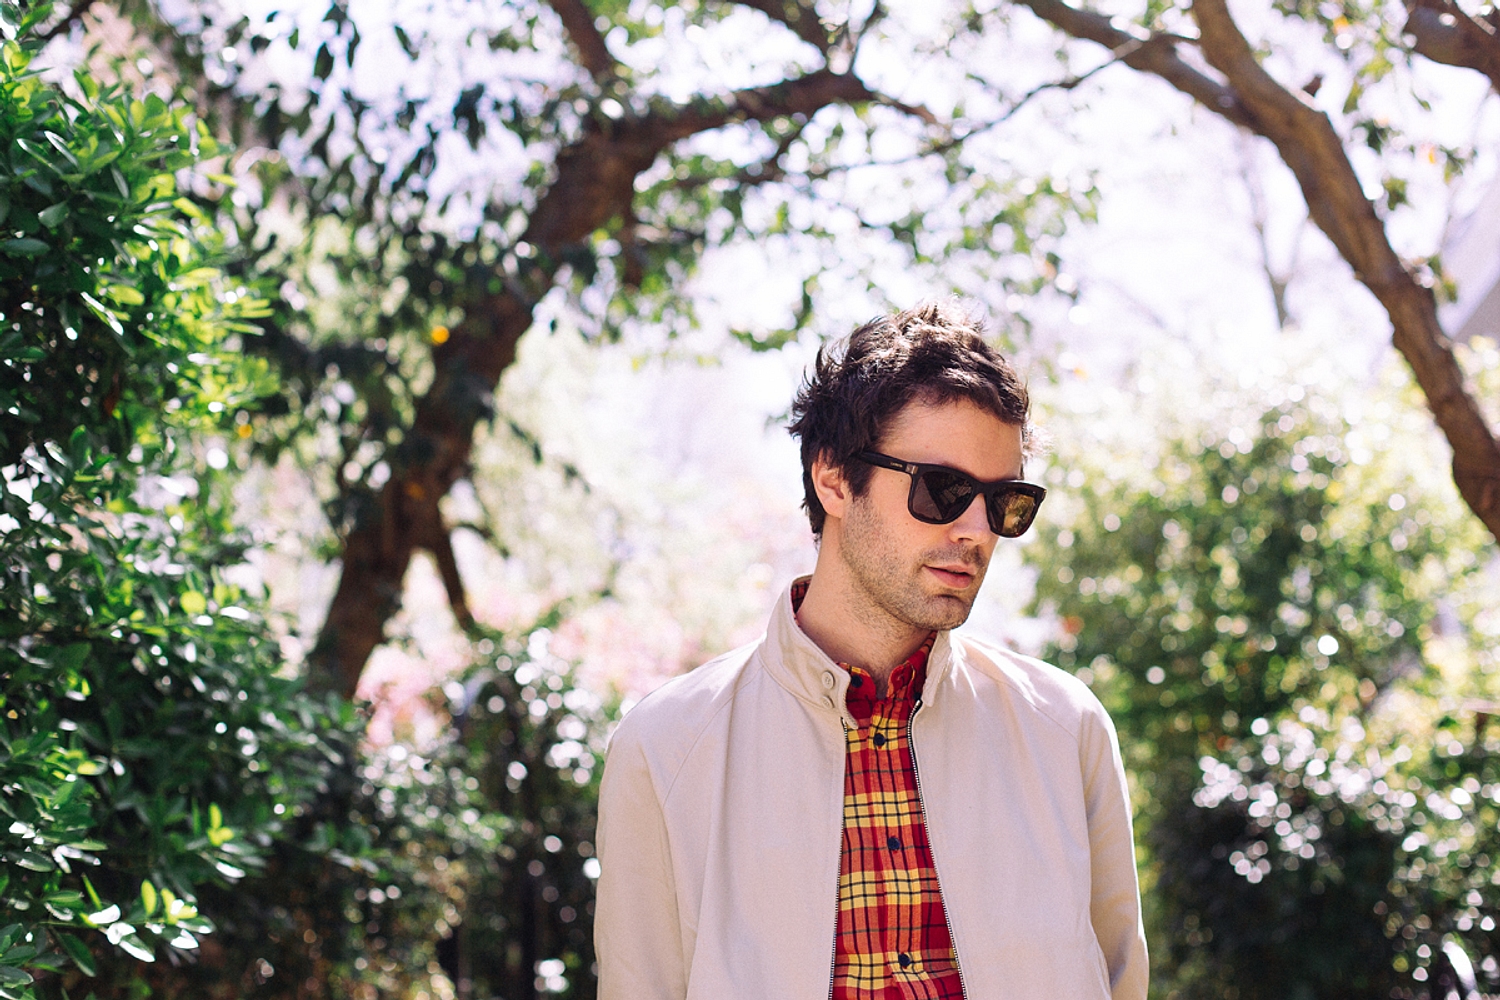 Double trouble - Passion Pit are back with two new singles